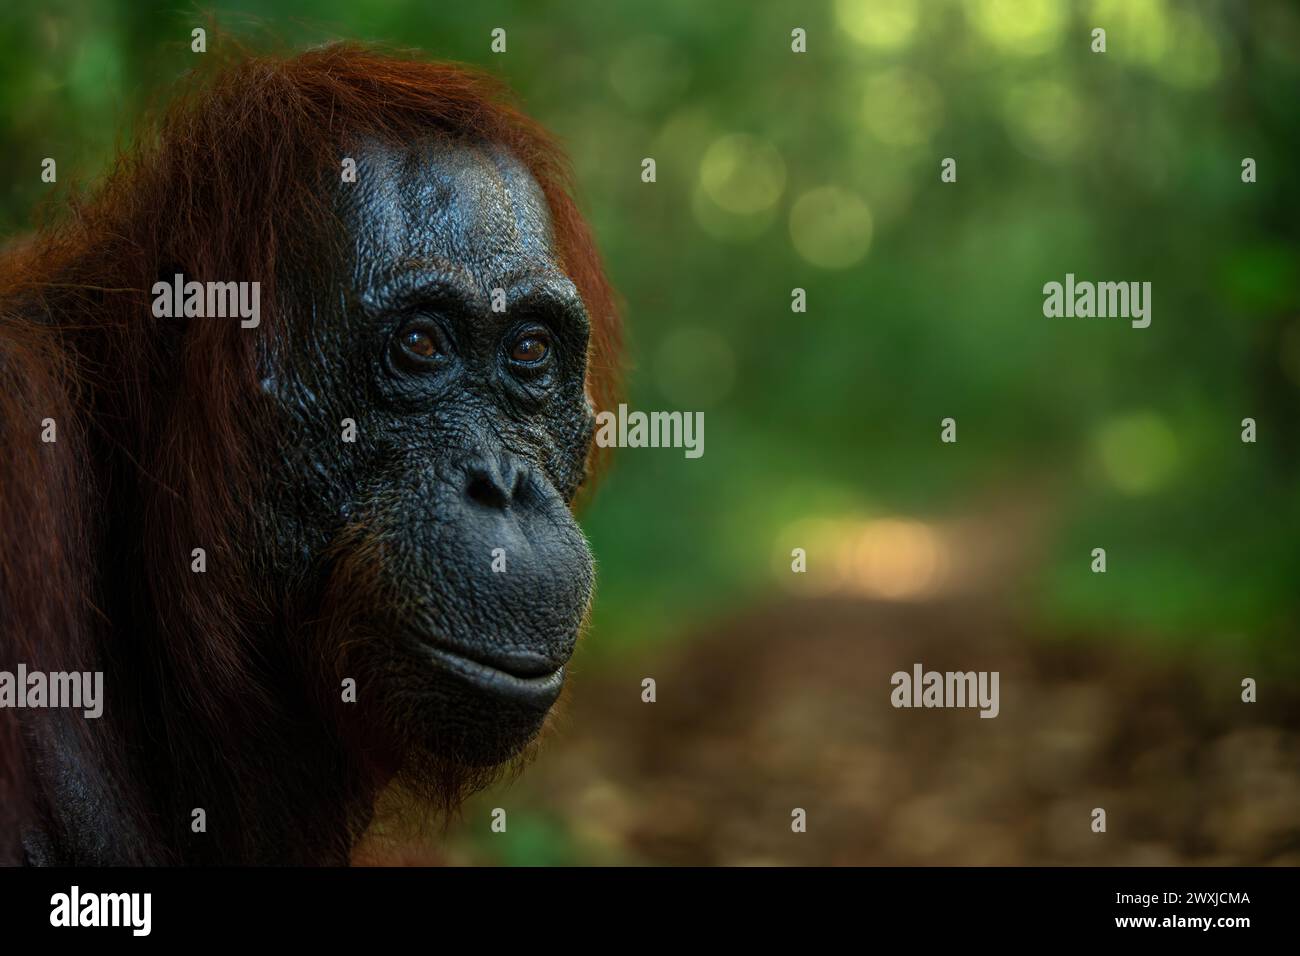 Natural light professional portrait of a female orangutan from Tanjung puting national park, Borneo, Indonesia against out of focus forest background Stock Photo